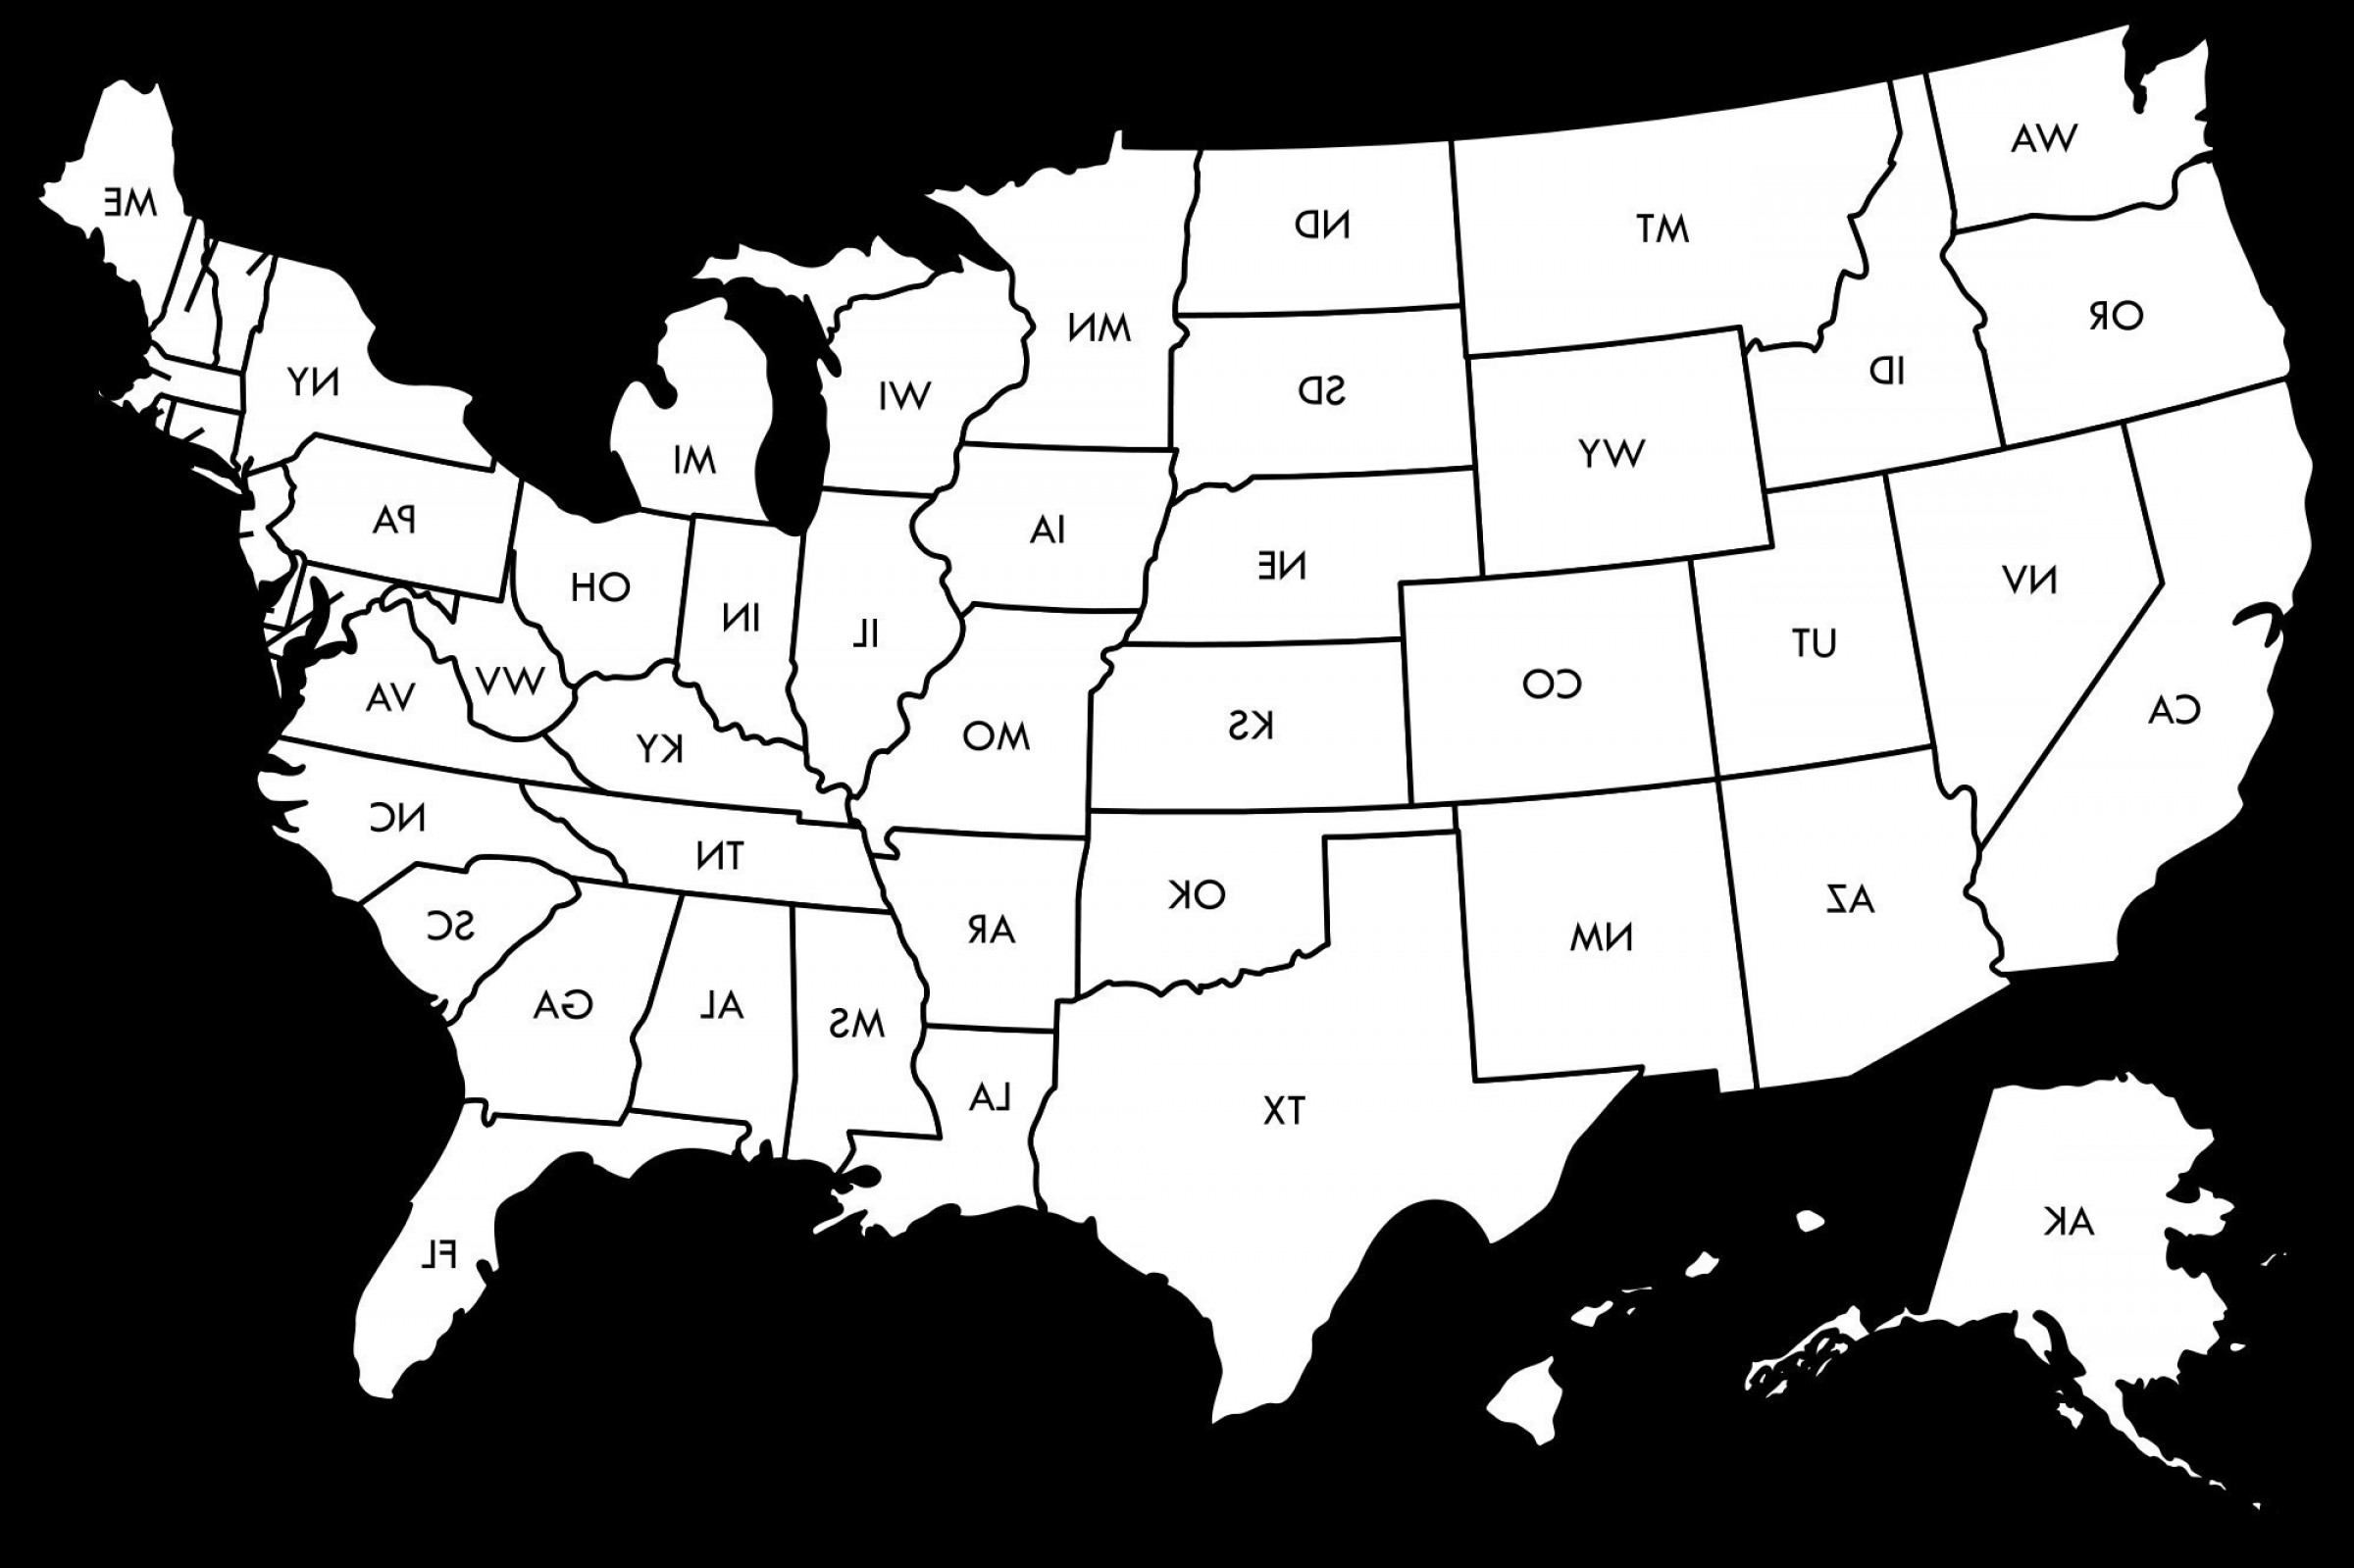 illustrator map of united states free vector download